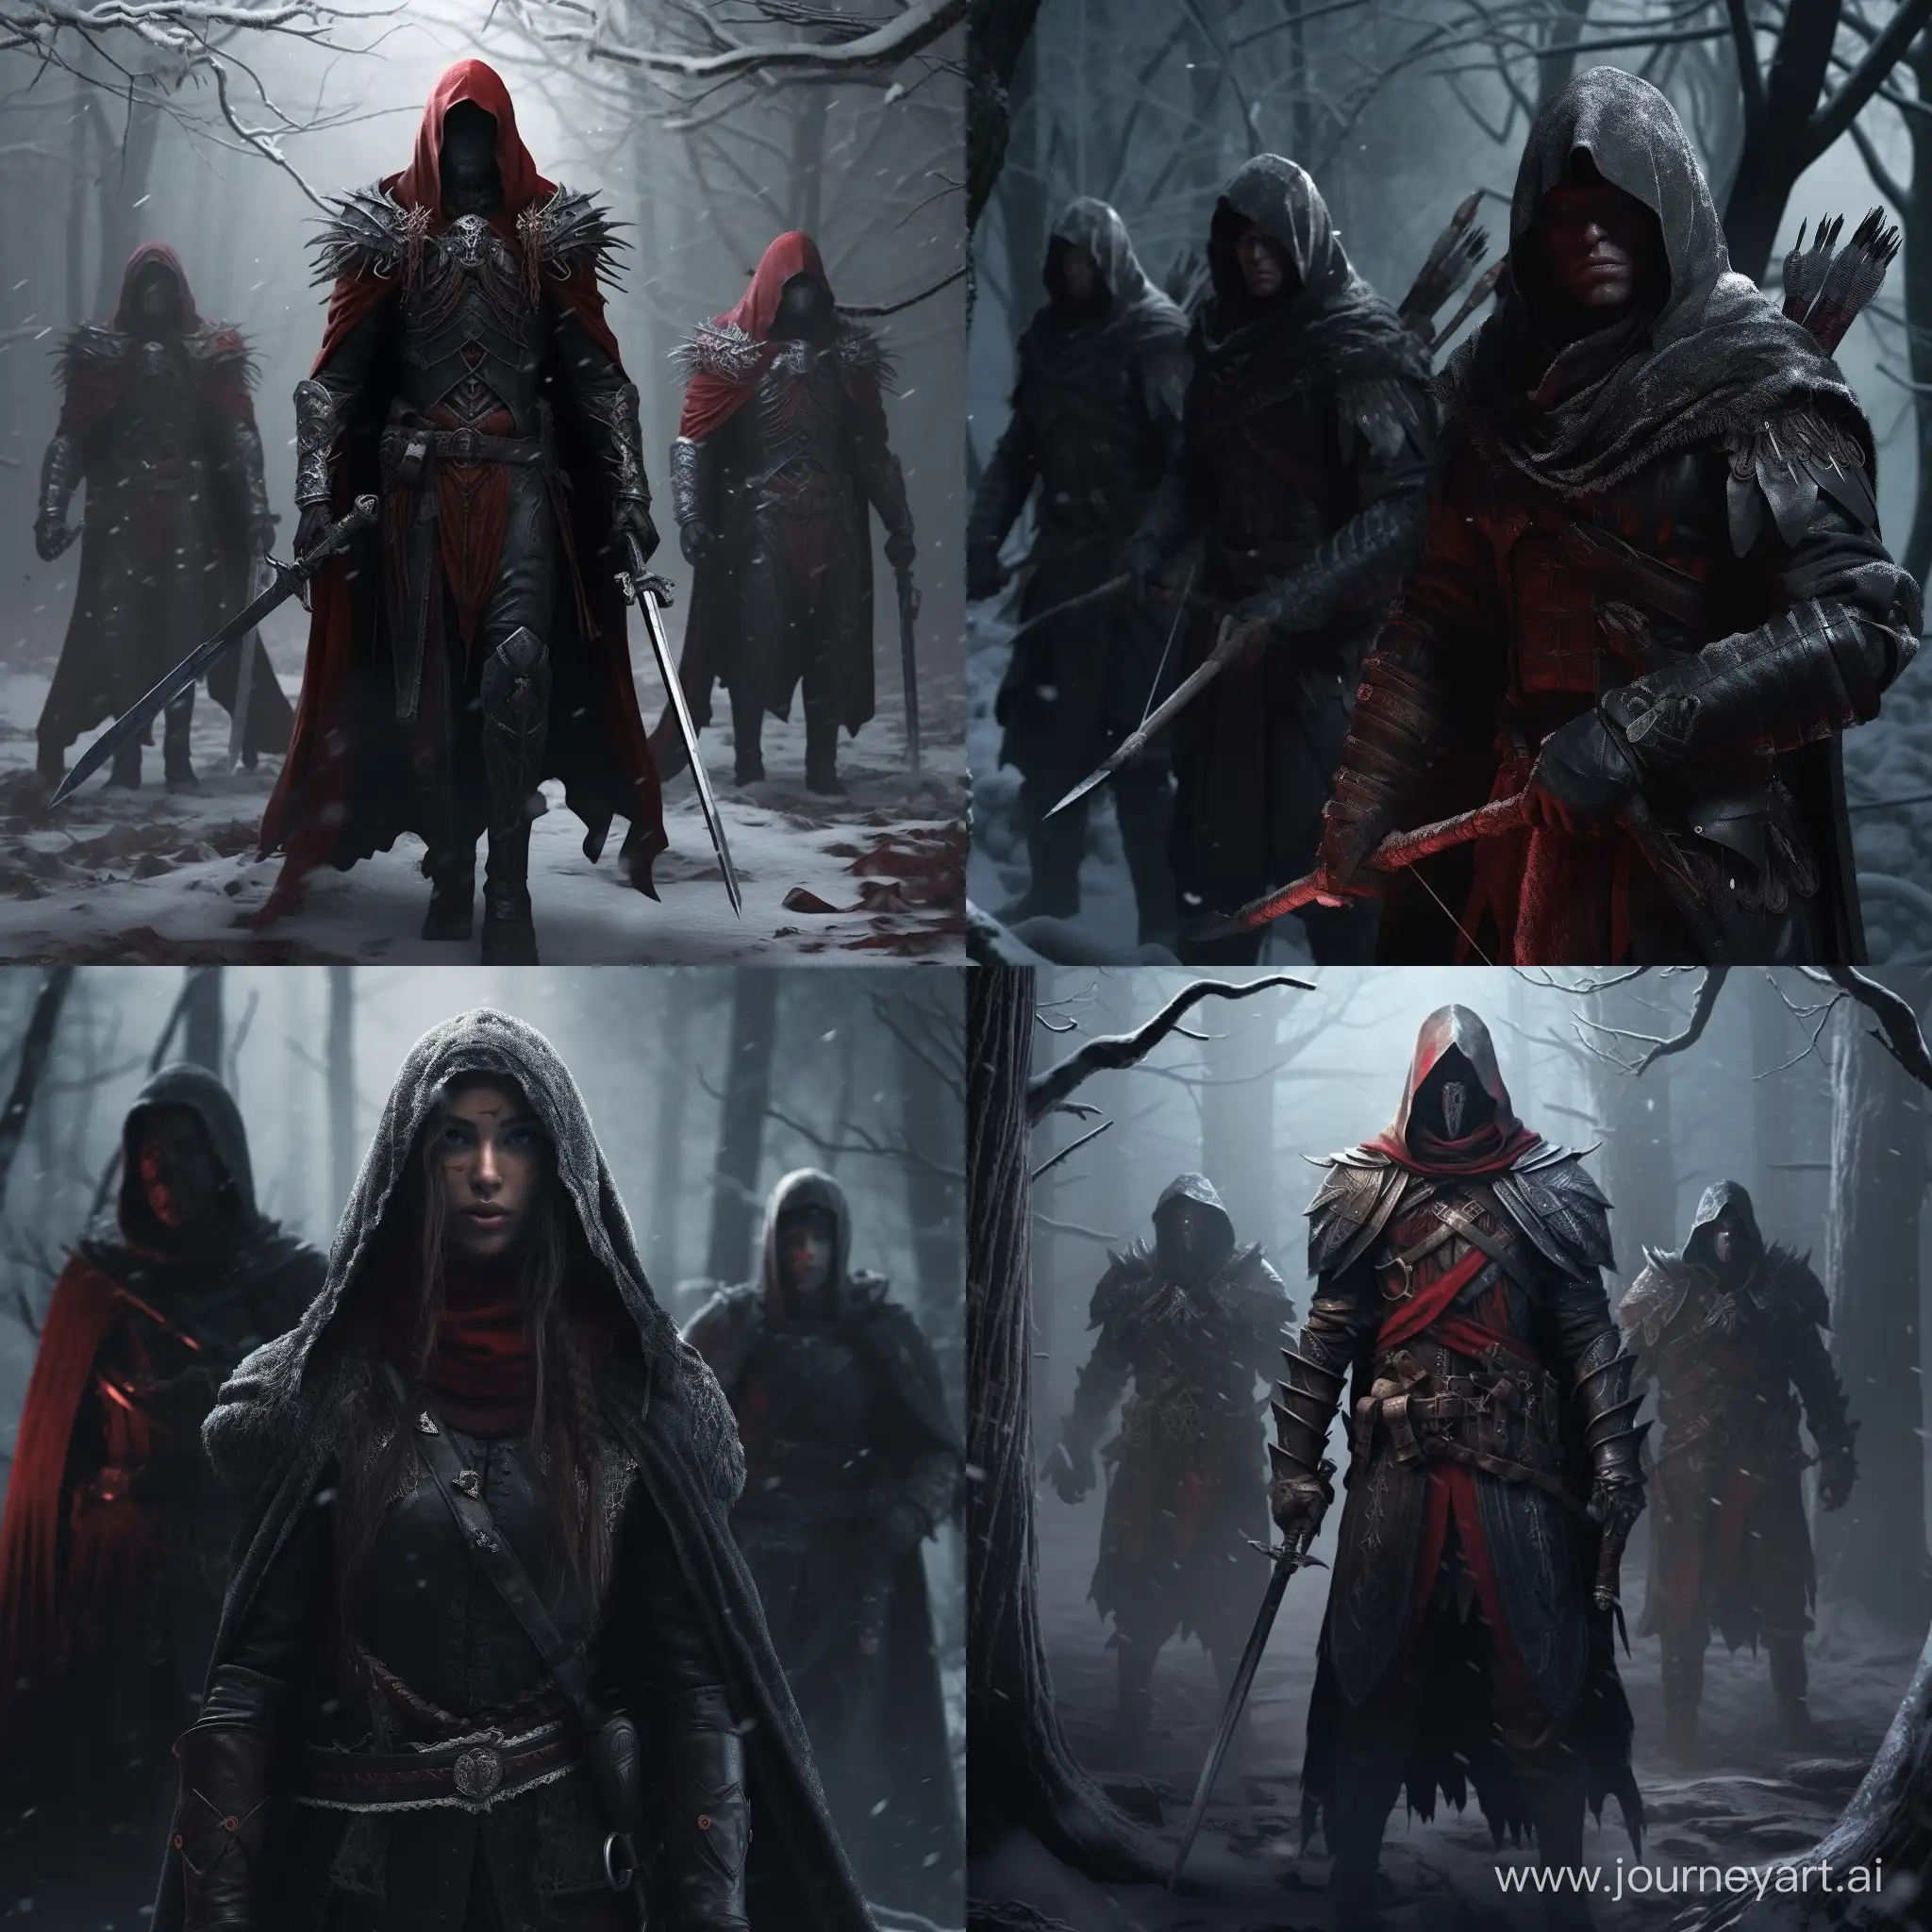 Best quality,4k, derailed, 3 bandits in snowy dark forest, he all in armor and red hood. He has medieval musket or sword. Fantasy.